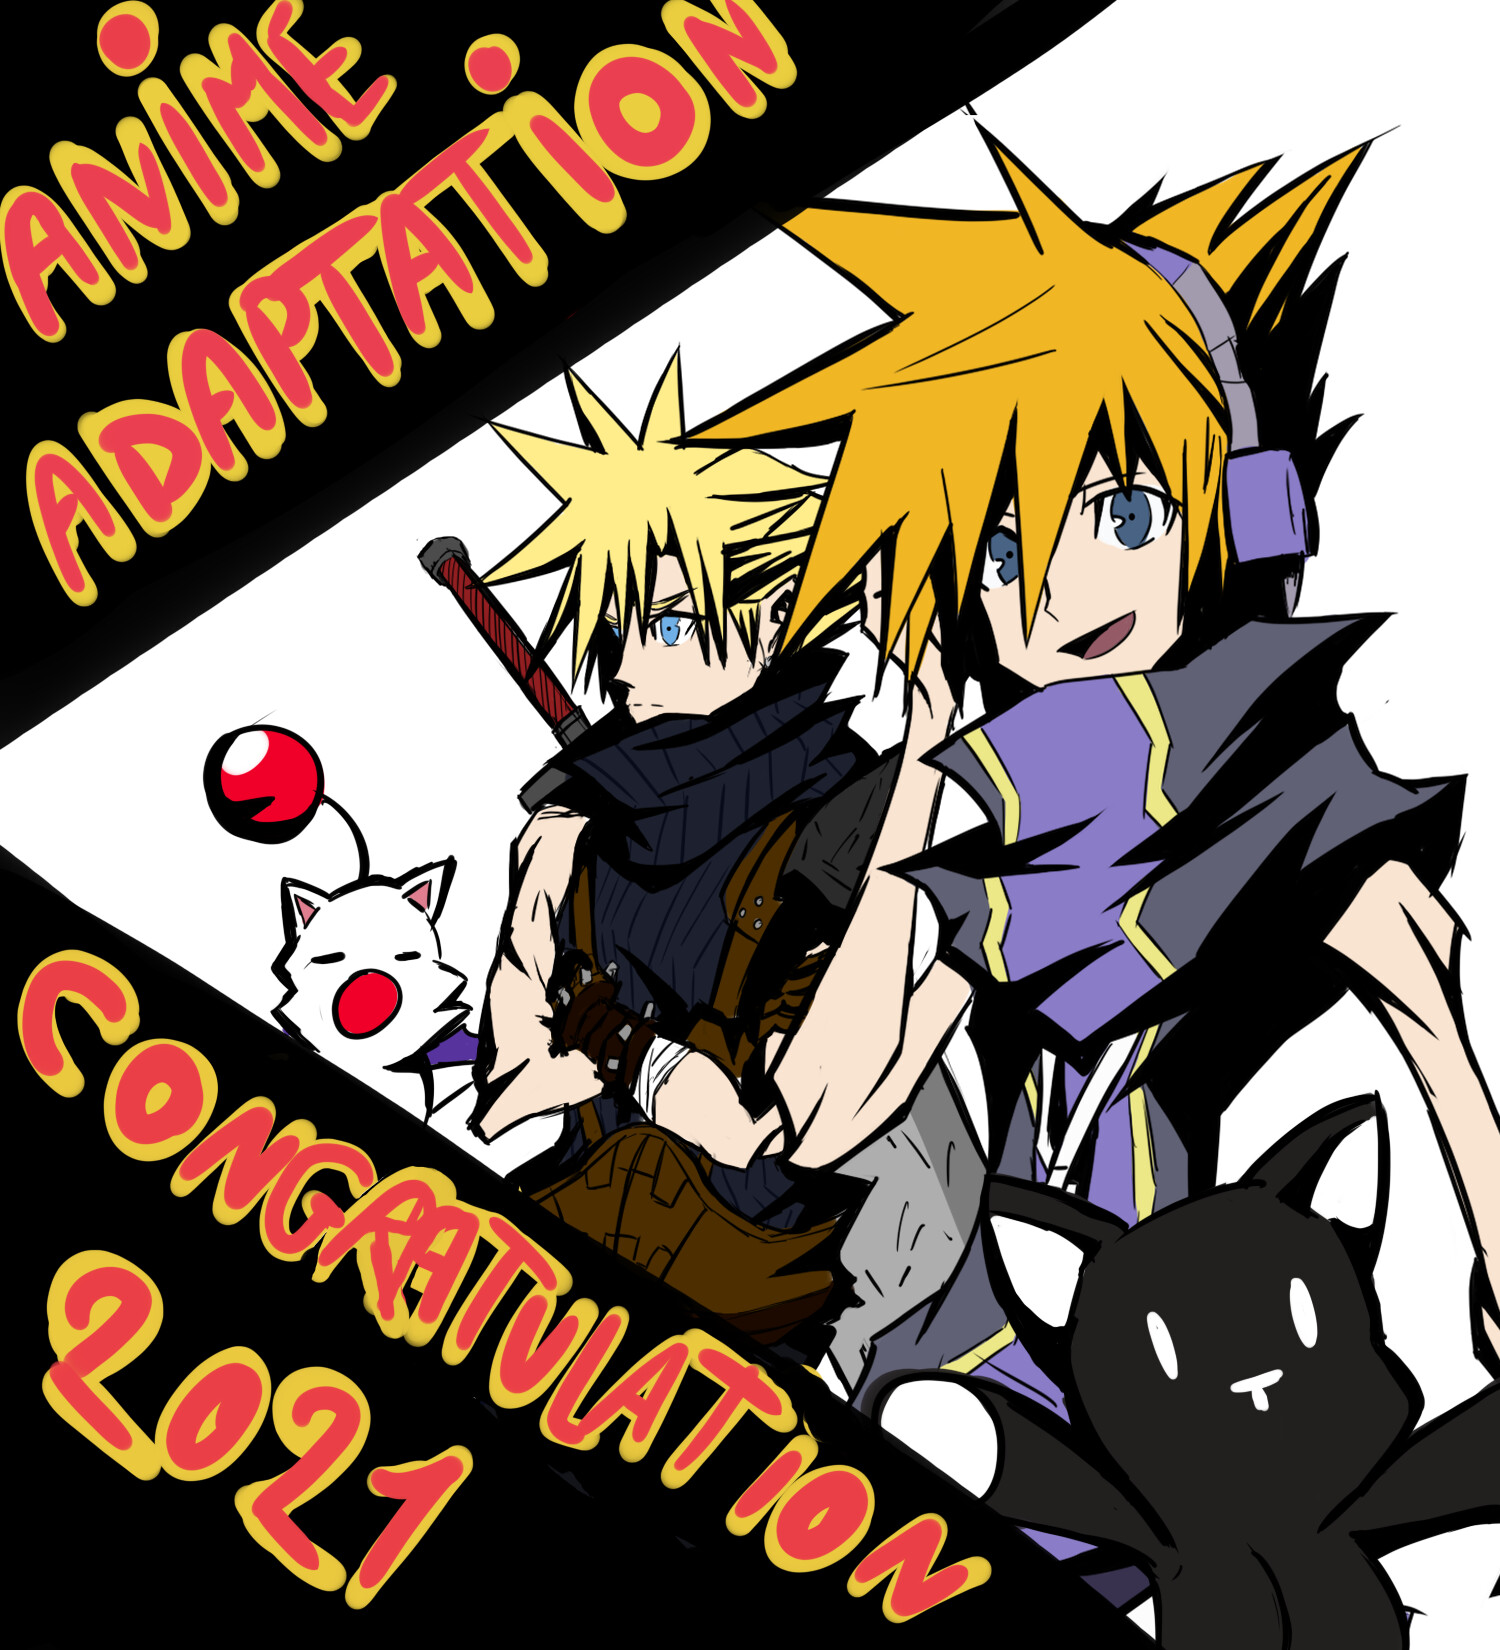 Pin by tunesann on TWEWY | Pose reference, End of the world, Anime